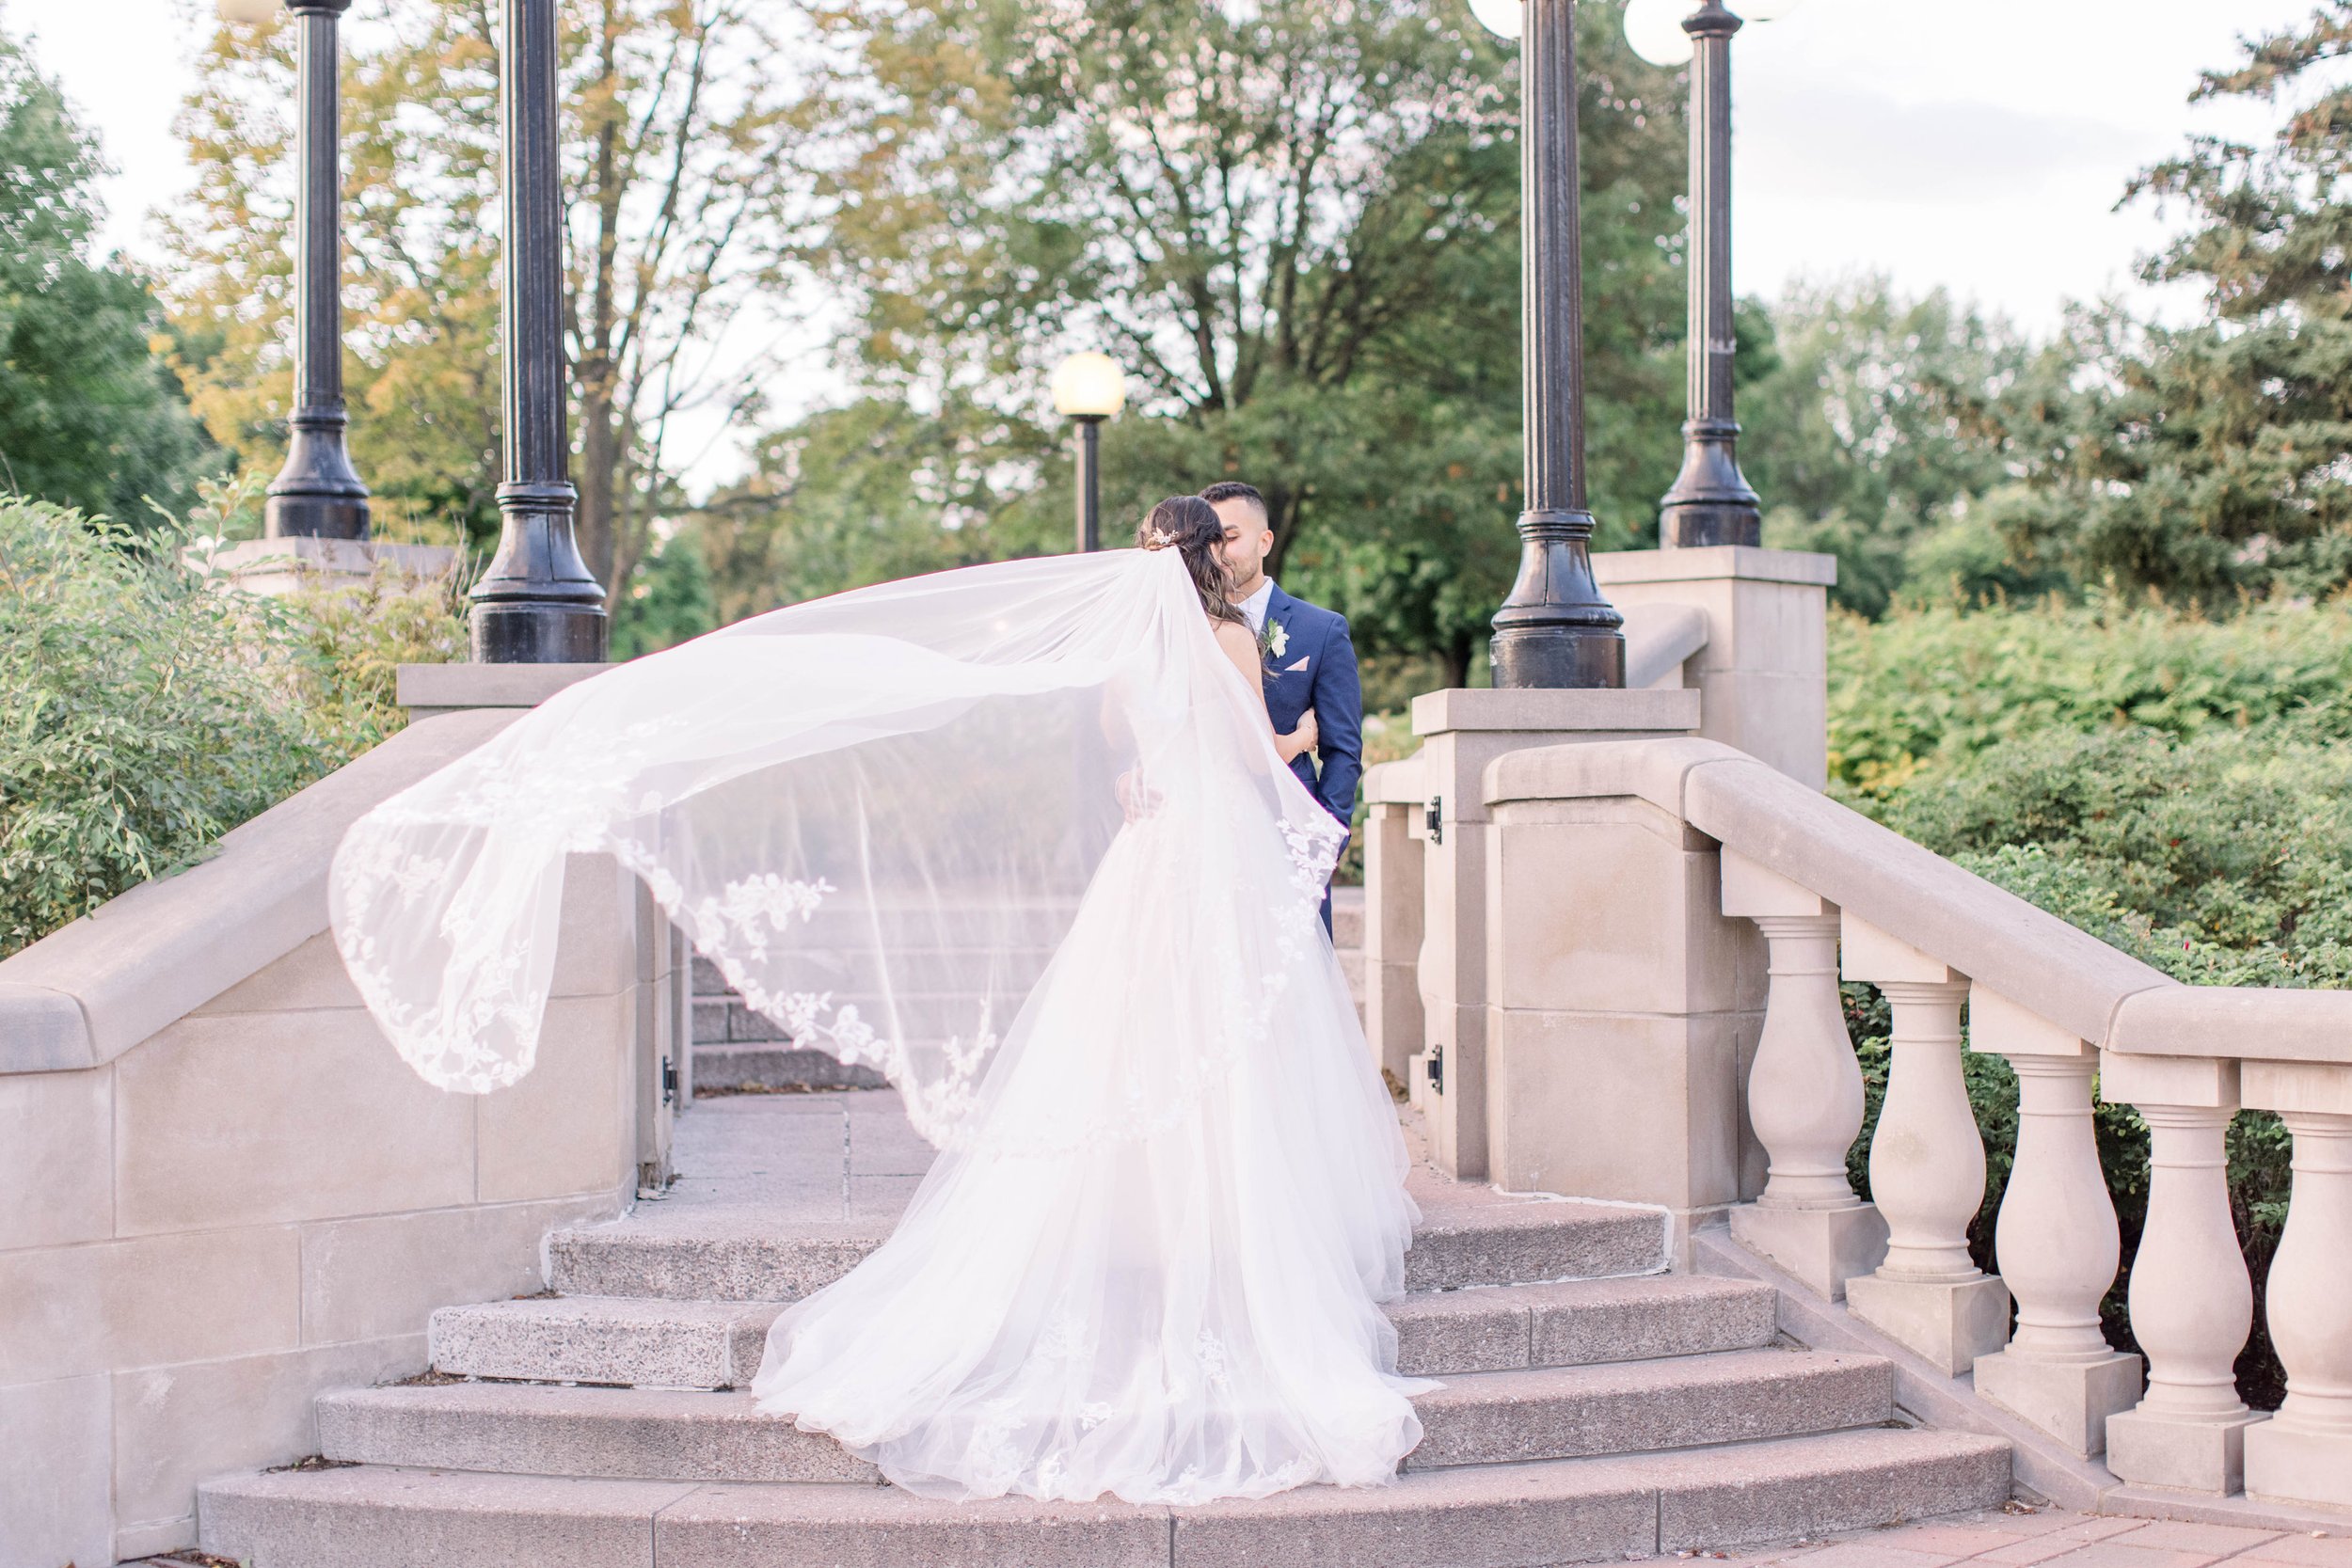  Ottawa professional photographer captures newlyweds kissing with a veil blowing by Chelsea Mason Photography. veil portraits #ChelseaMasonPhotography #ChelseaMasonWeddings #DowntownOttawa #FairmontChateauLaurier #OttawaWeddings #OttawaPhotographers 